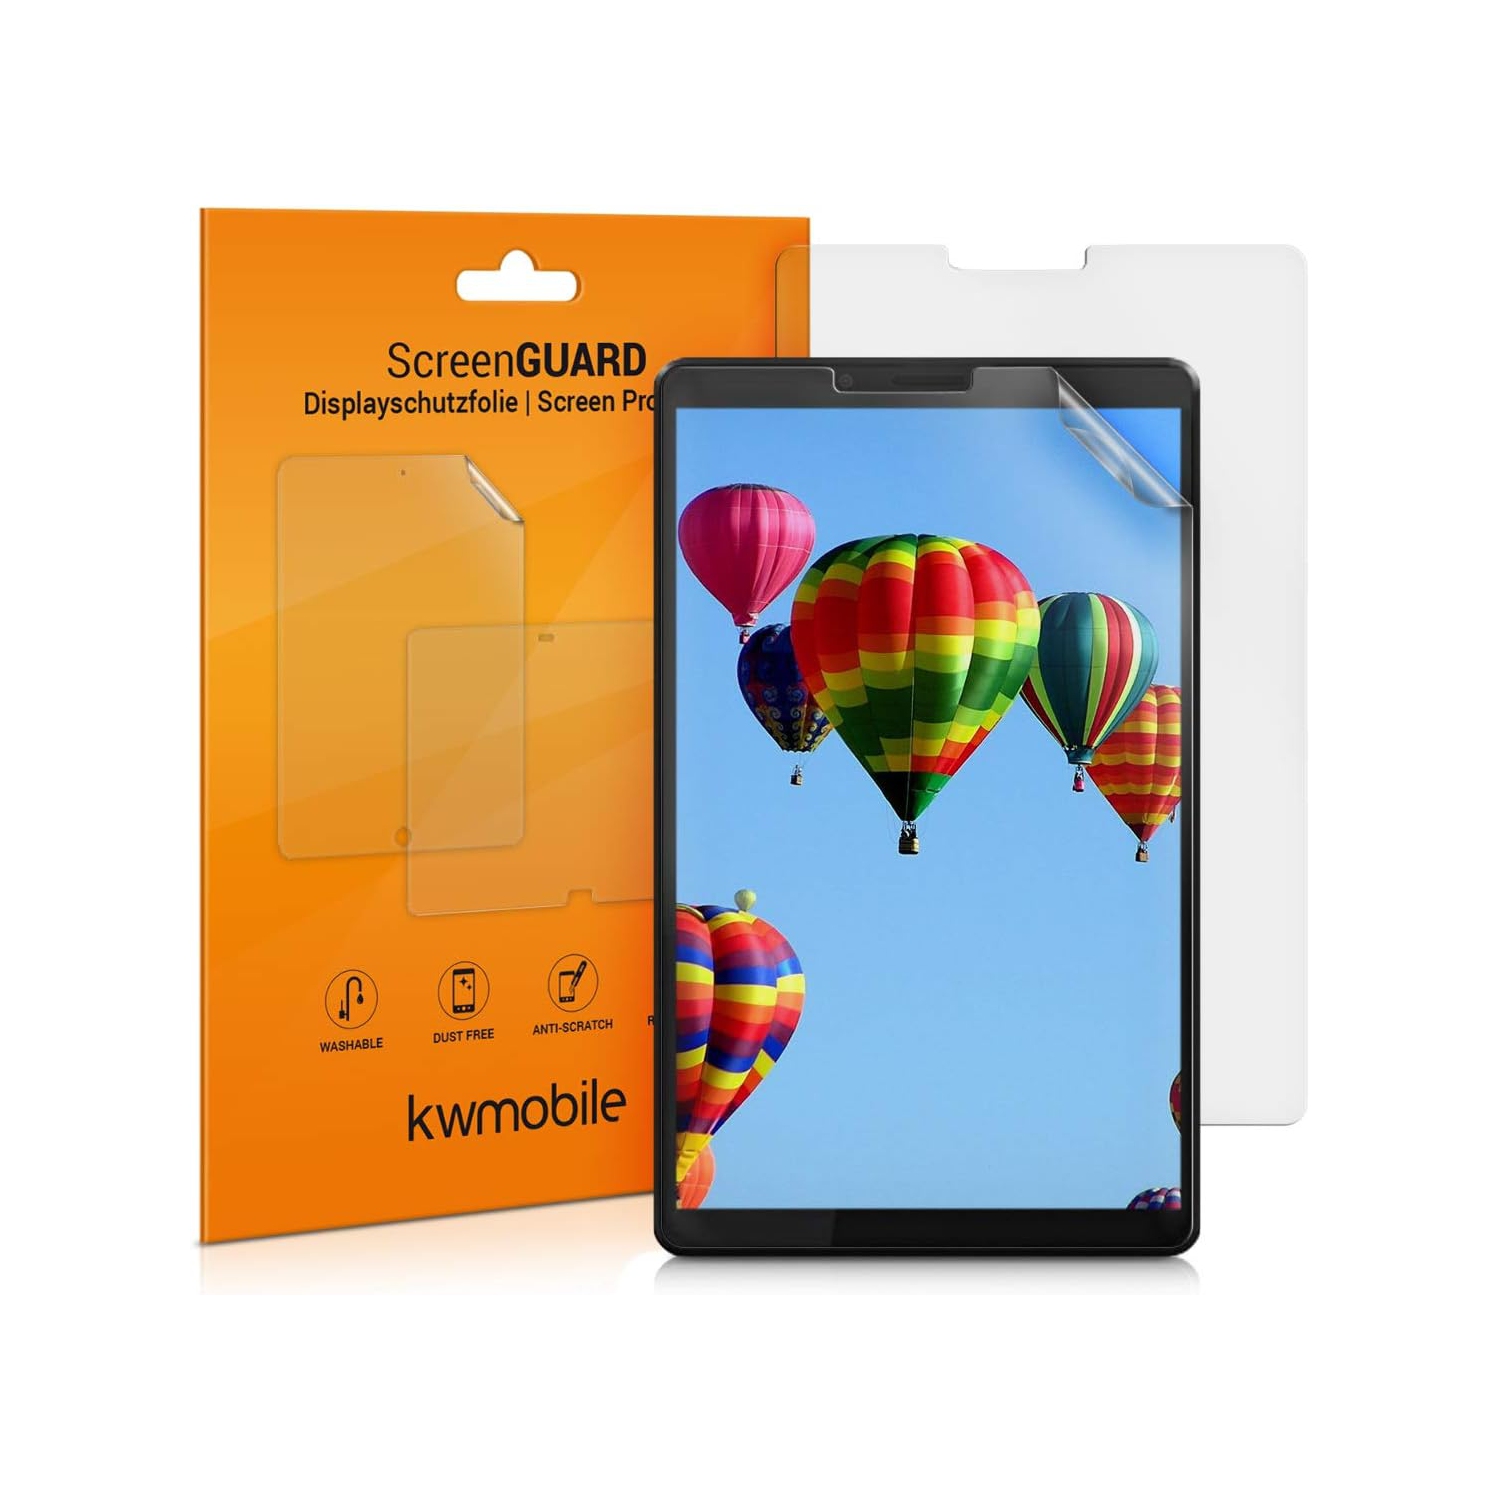 Screen Protector Compatible with Lenovo Tab M7 (2. Generation) Screen Protector - 2X Anti-Reflective Matte